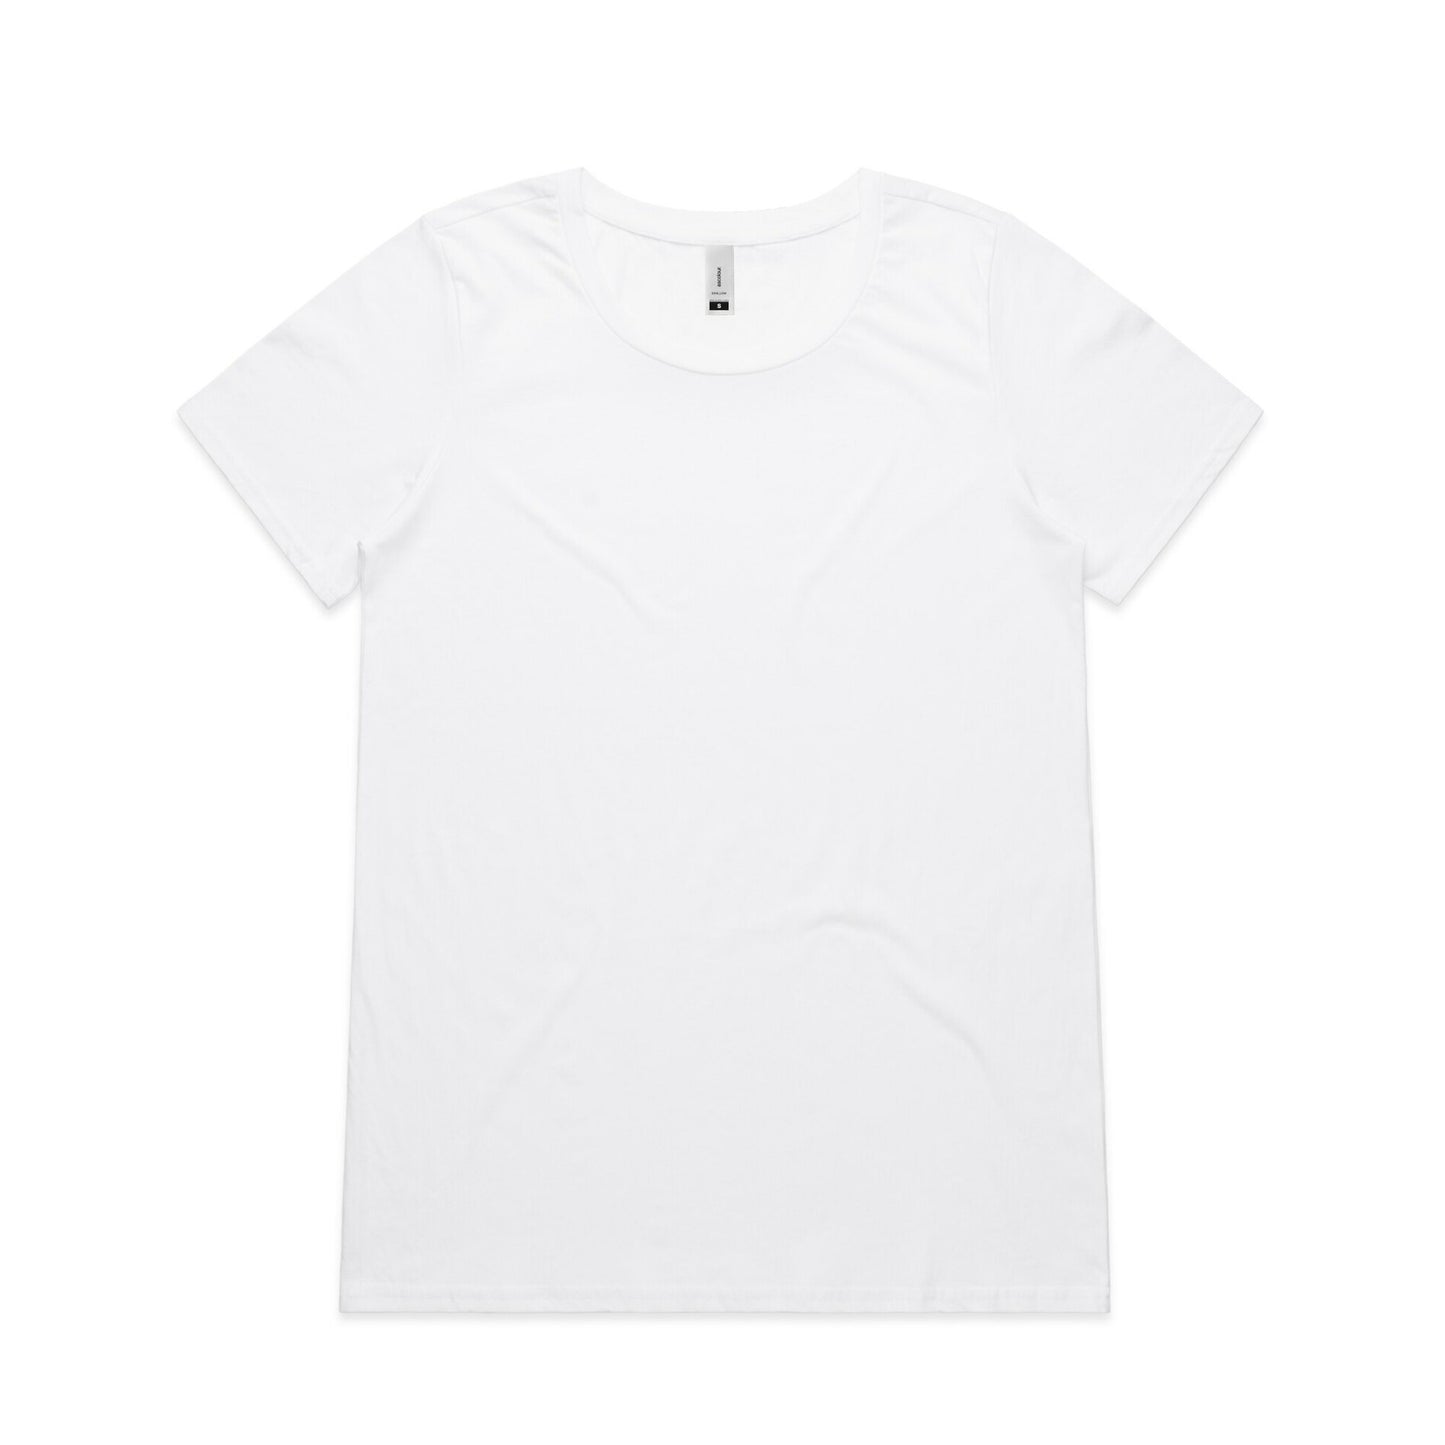 WO'S SHALLOW SCOOP TEE - 4011